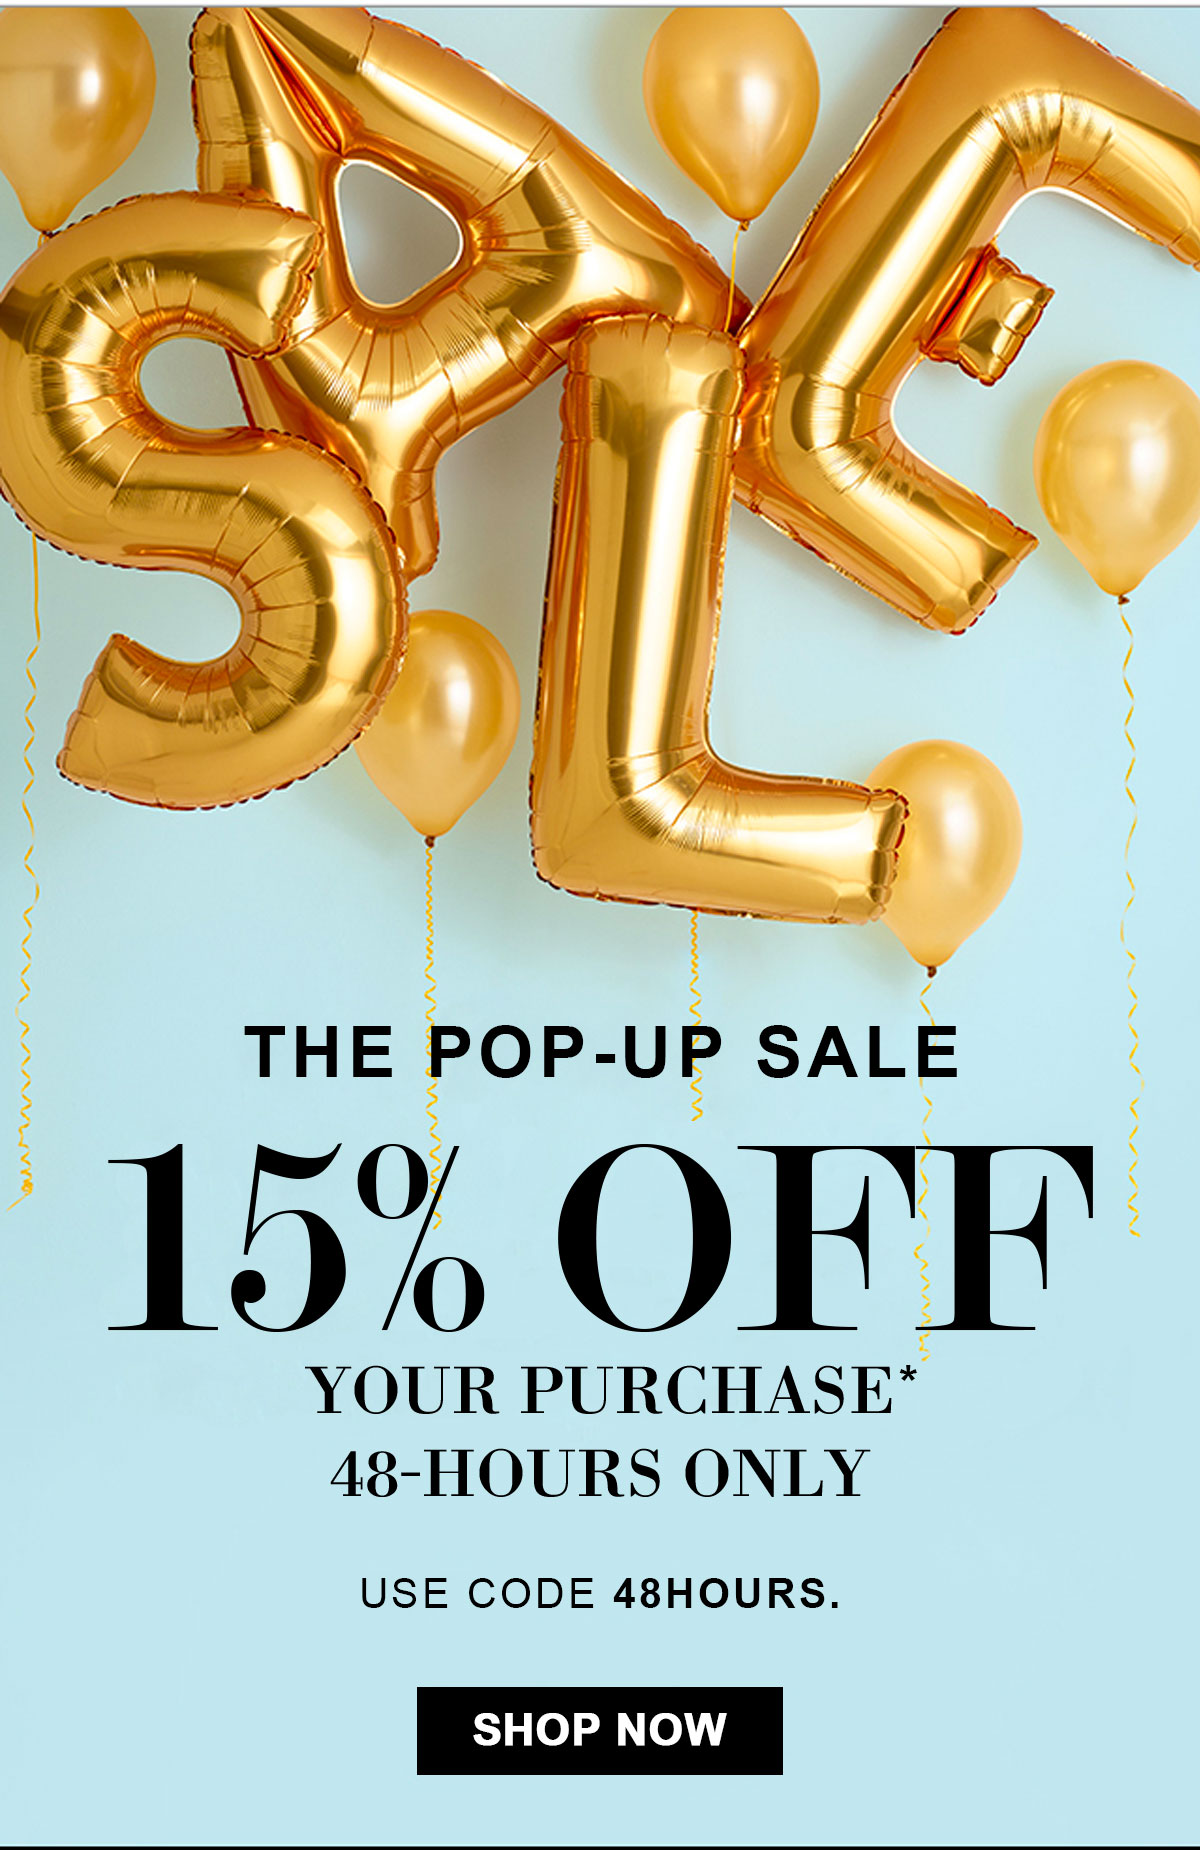 SALE  The Pop-Up Sale 15% Off Your Purchase* 48-Hours Only  Use code 48HOURS. Shop Now